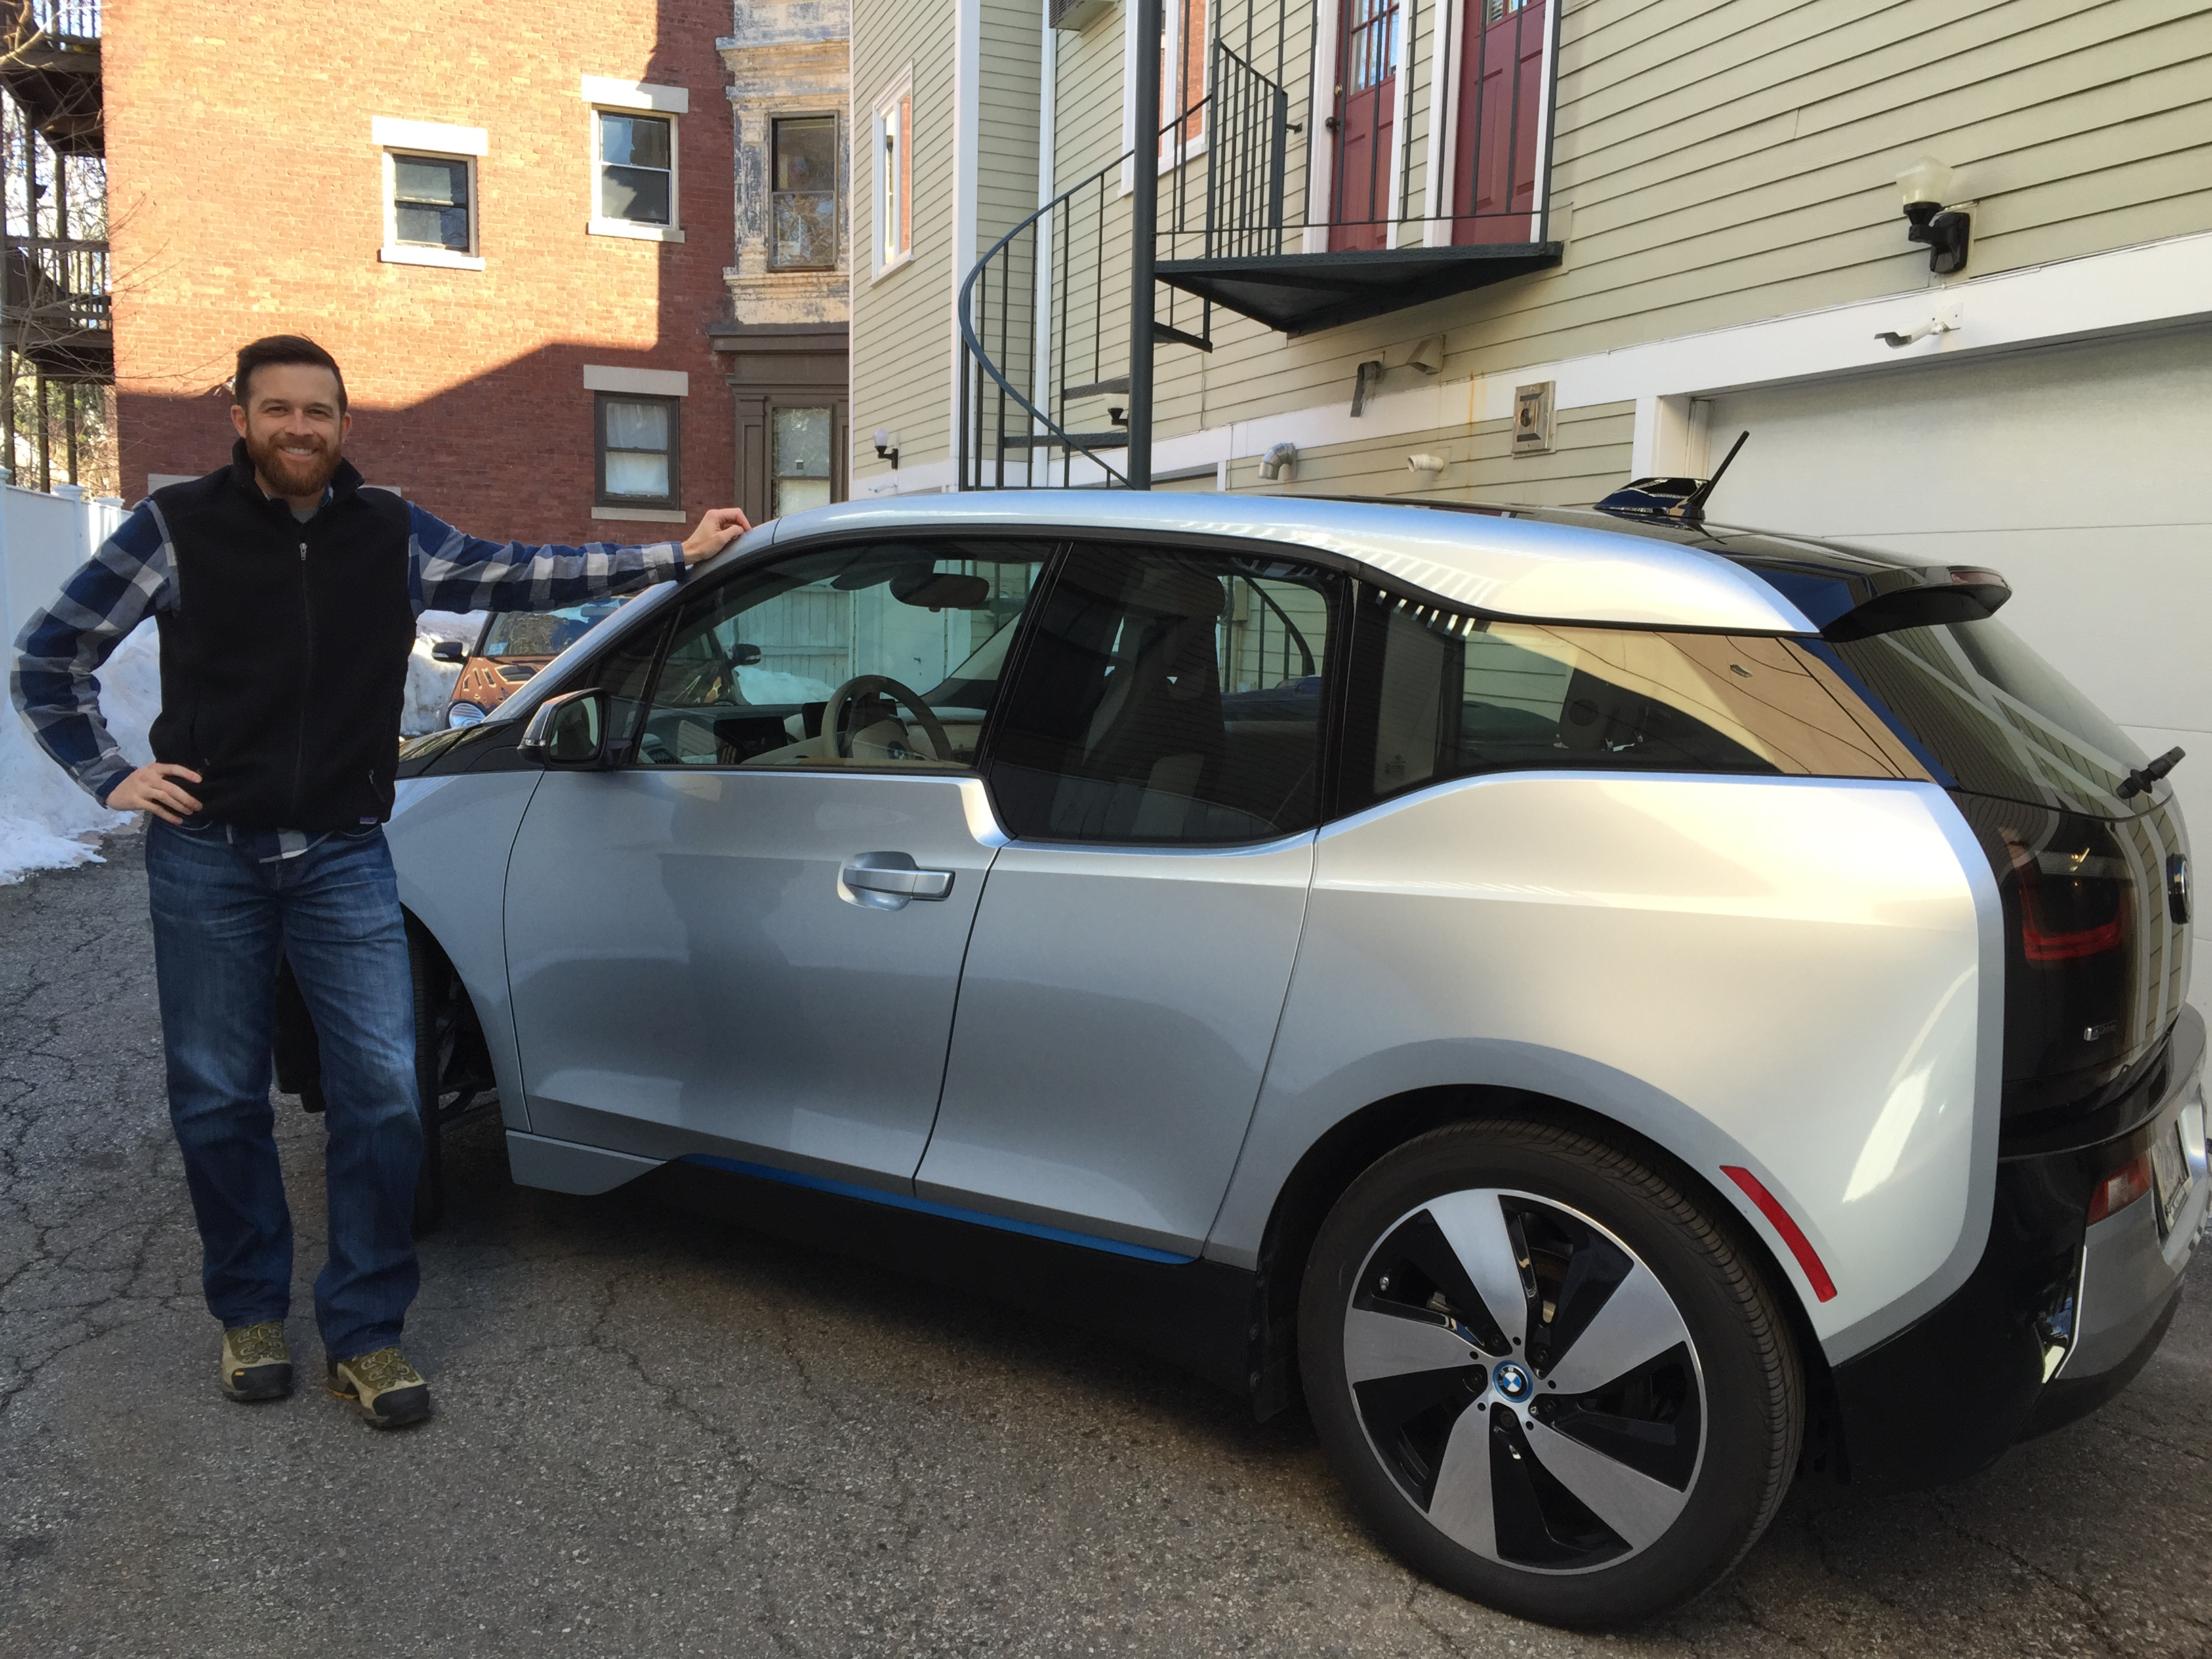 BMW abandons the i3, the car that could have birthed a bright